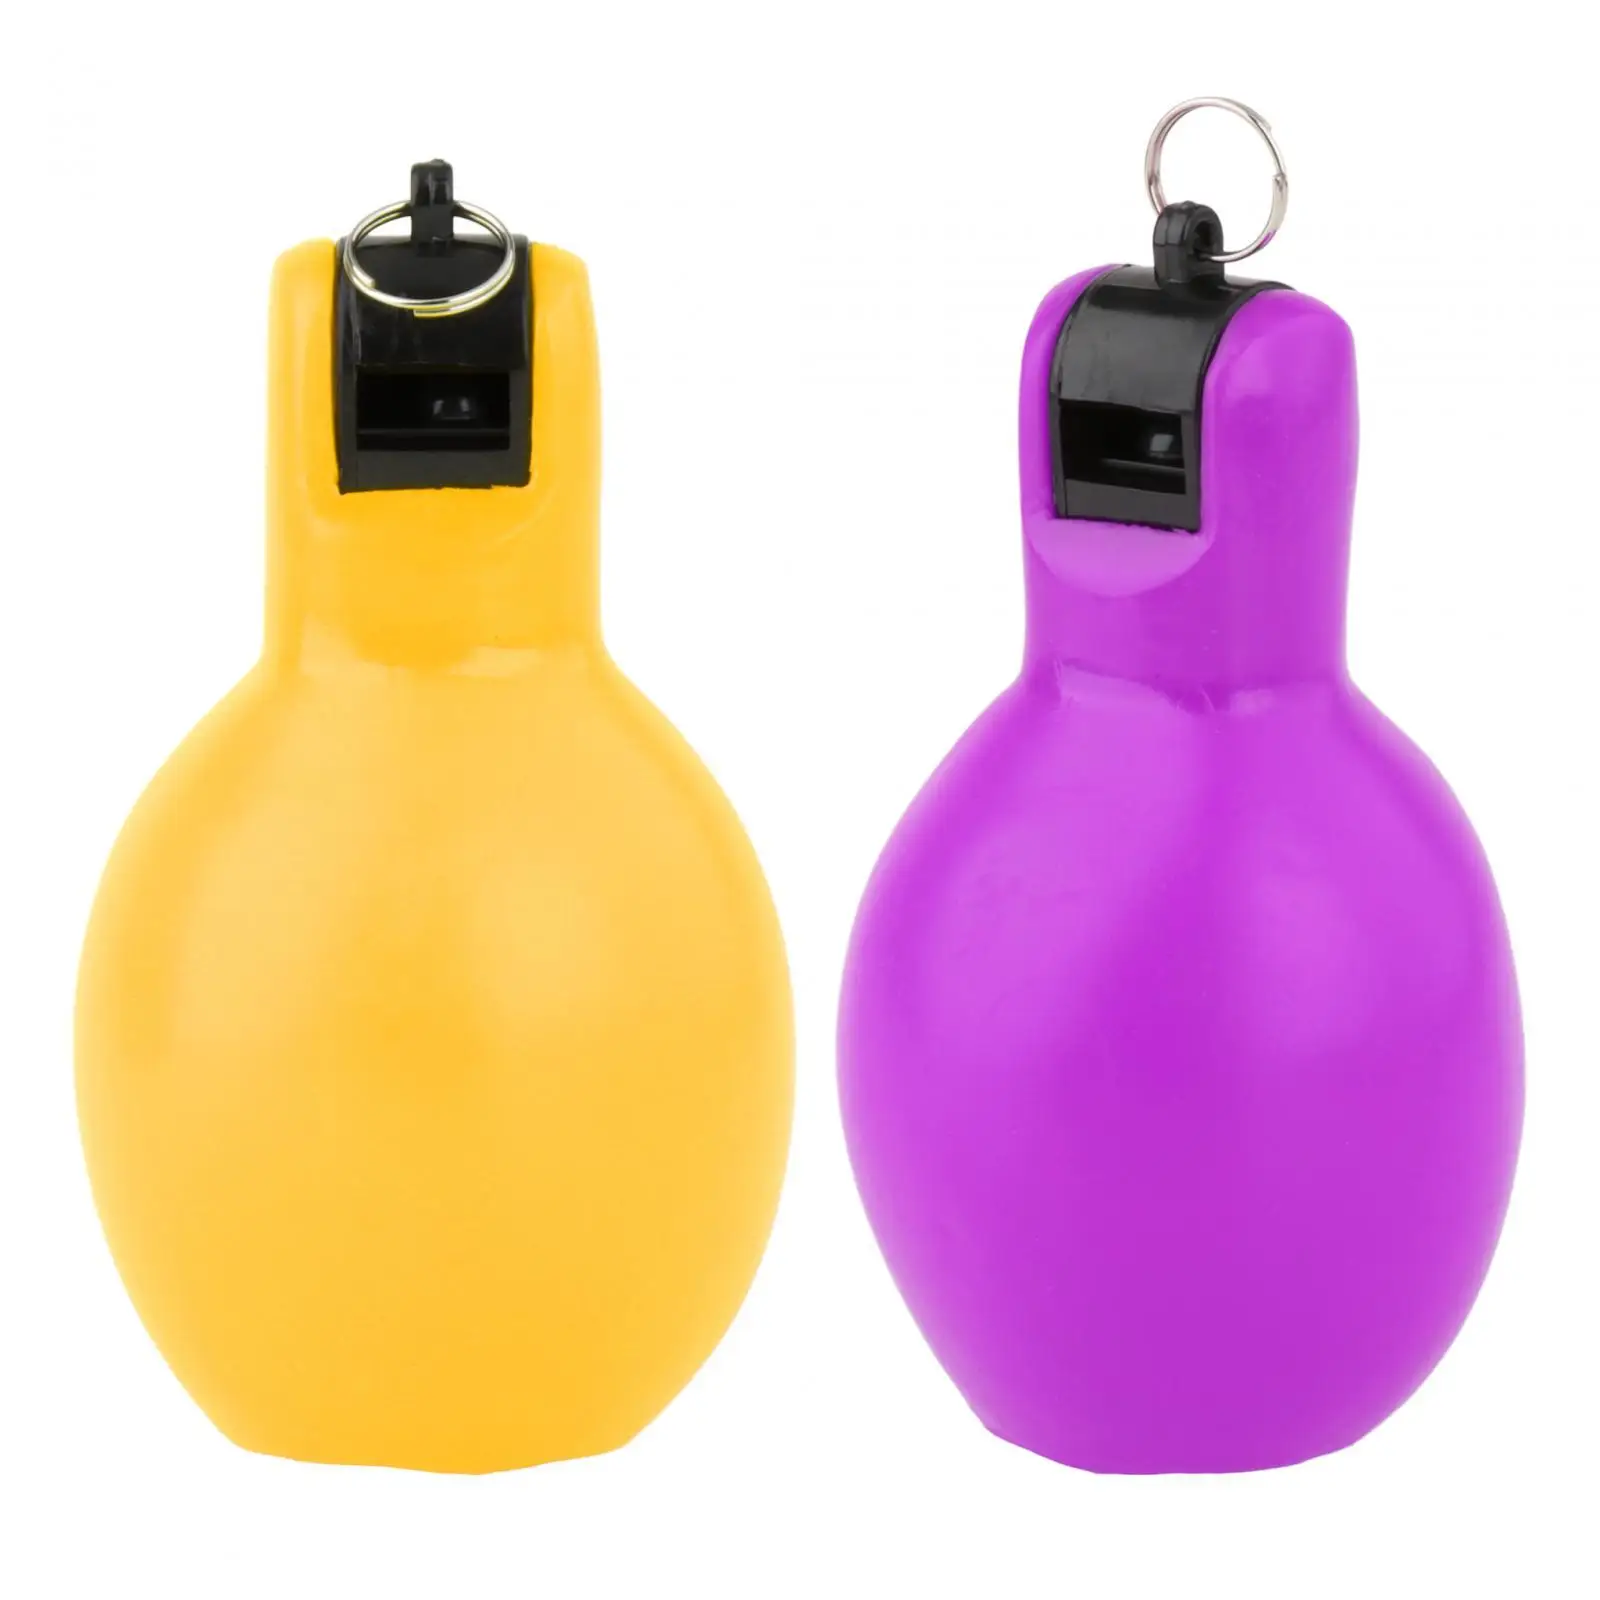 2Pcs Hand Squeeze Whistles Coaches Whistle Loud Sports Trainer Whistle for Training Trekking Coaches Children Referees